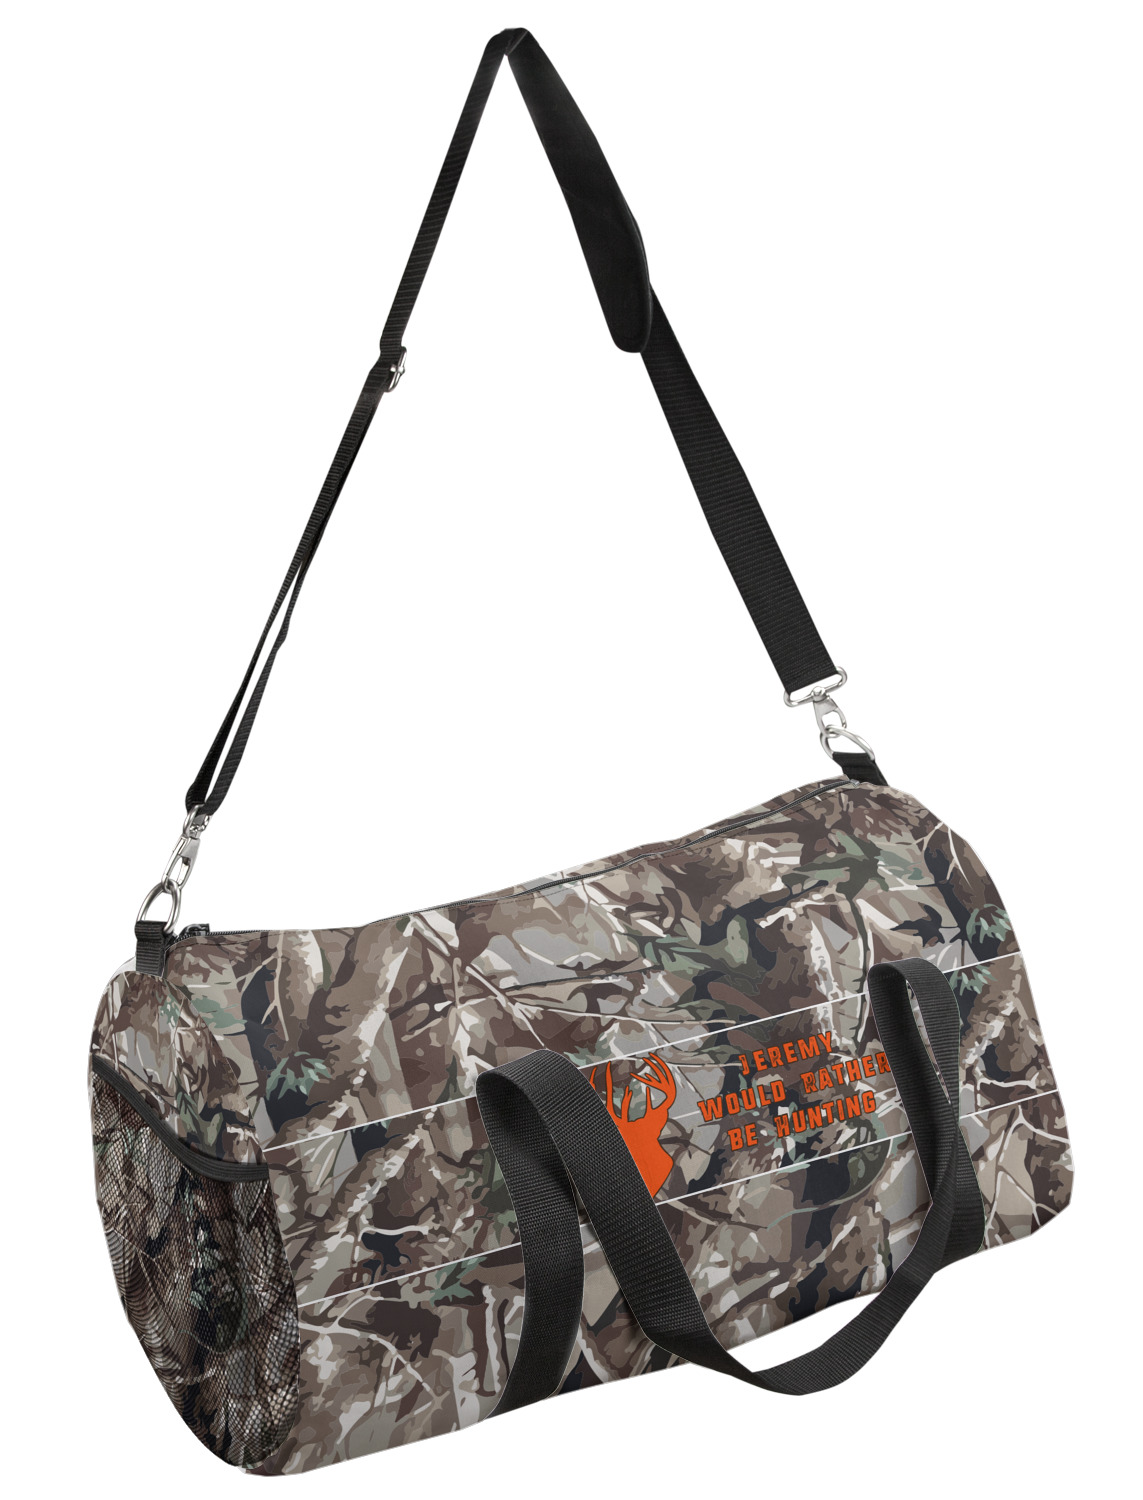 Hunting Camo Duffel Bag - Small (Personalized) - YouCustomizeIt